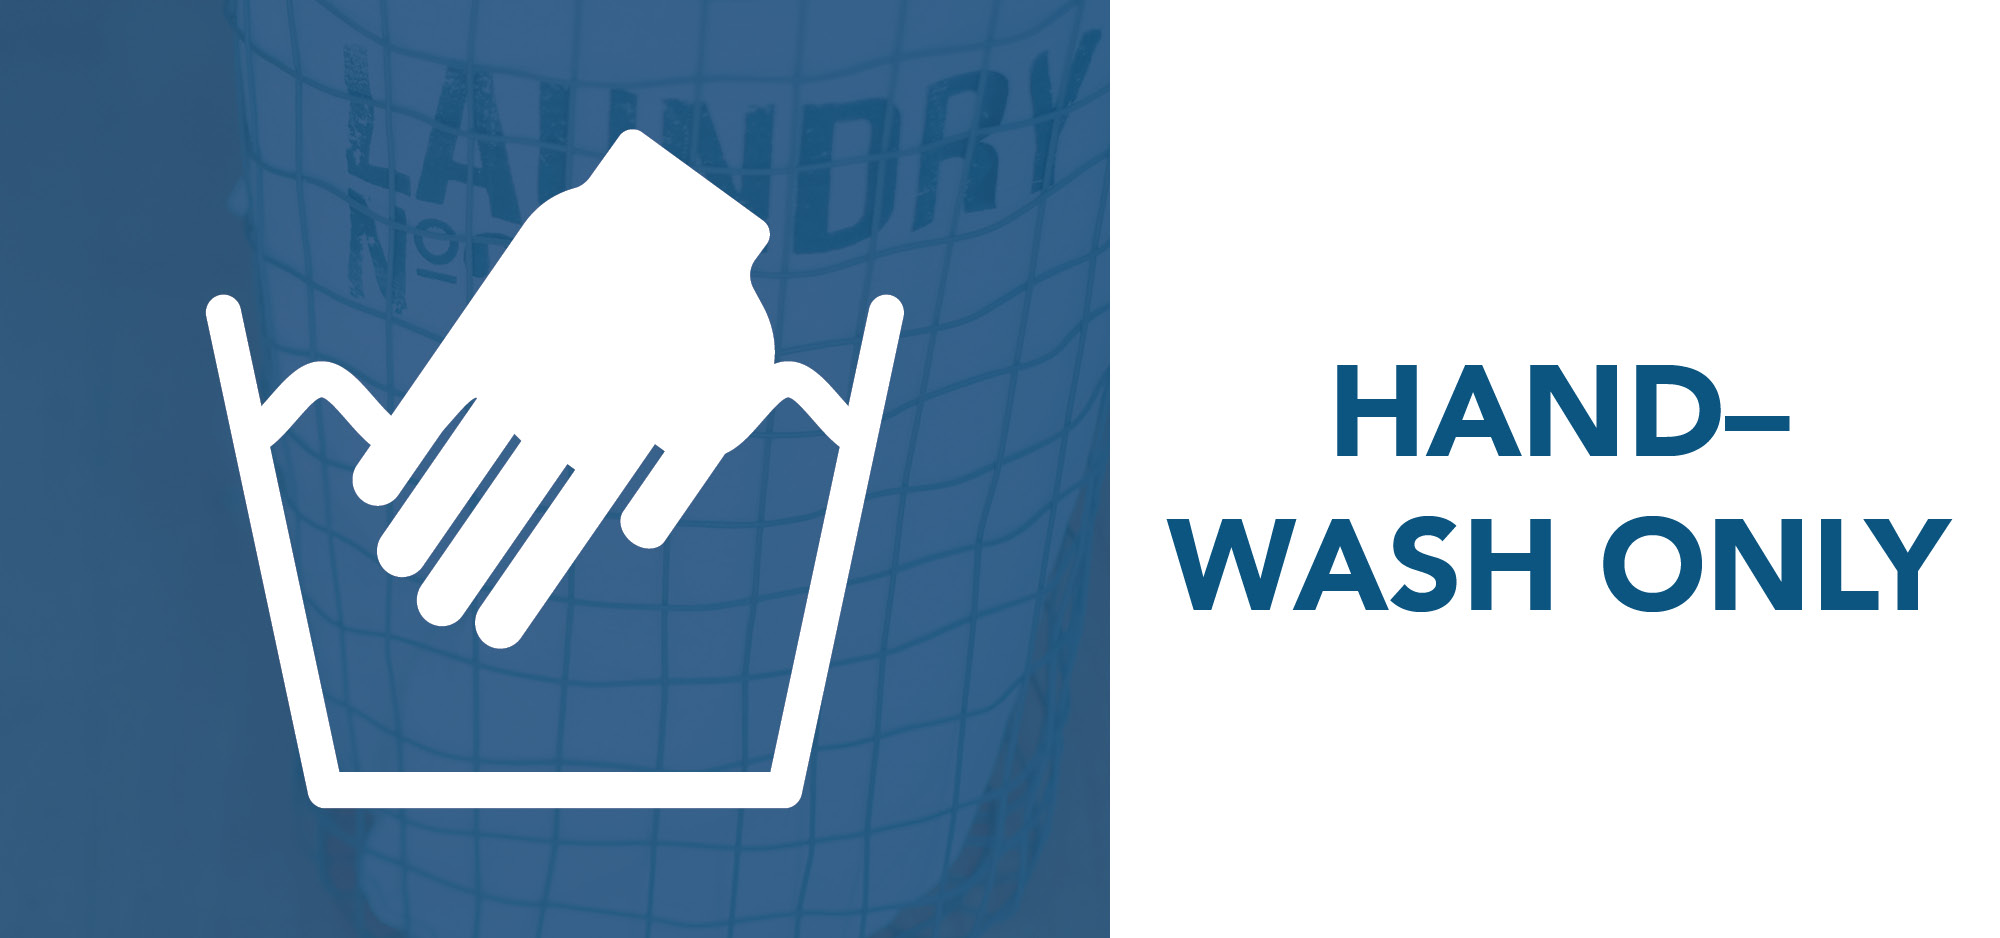 hand-wash only symbol